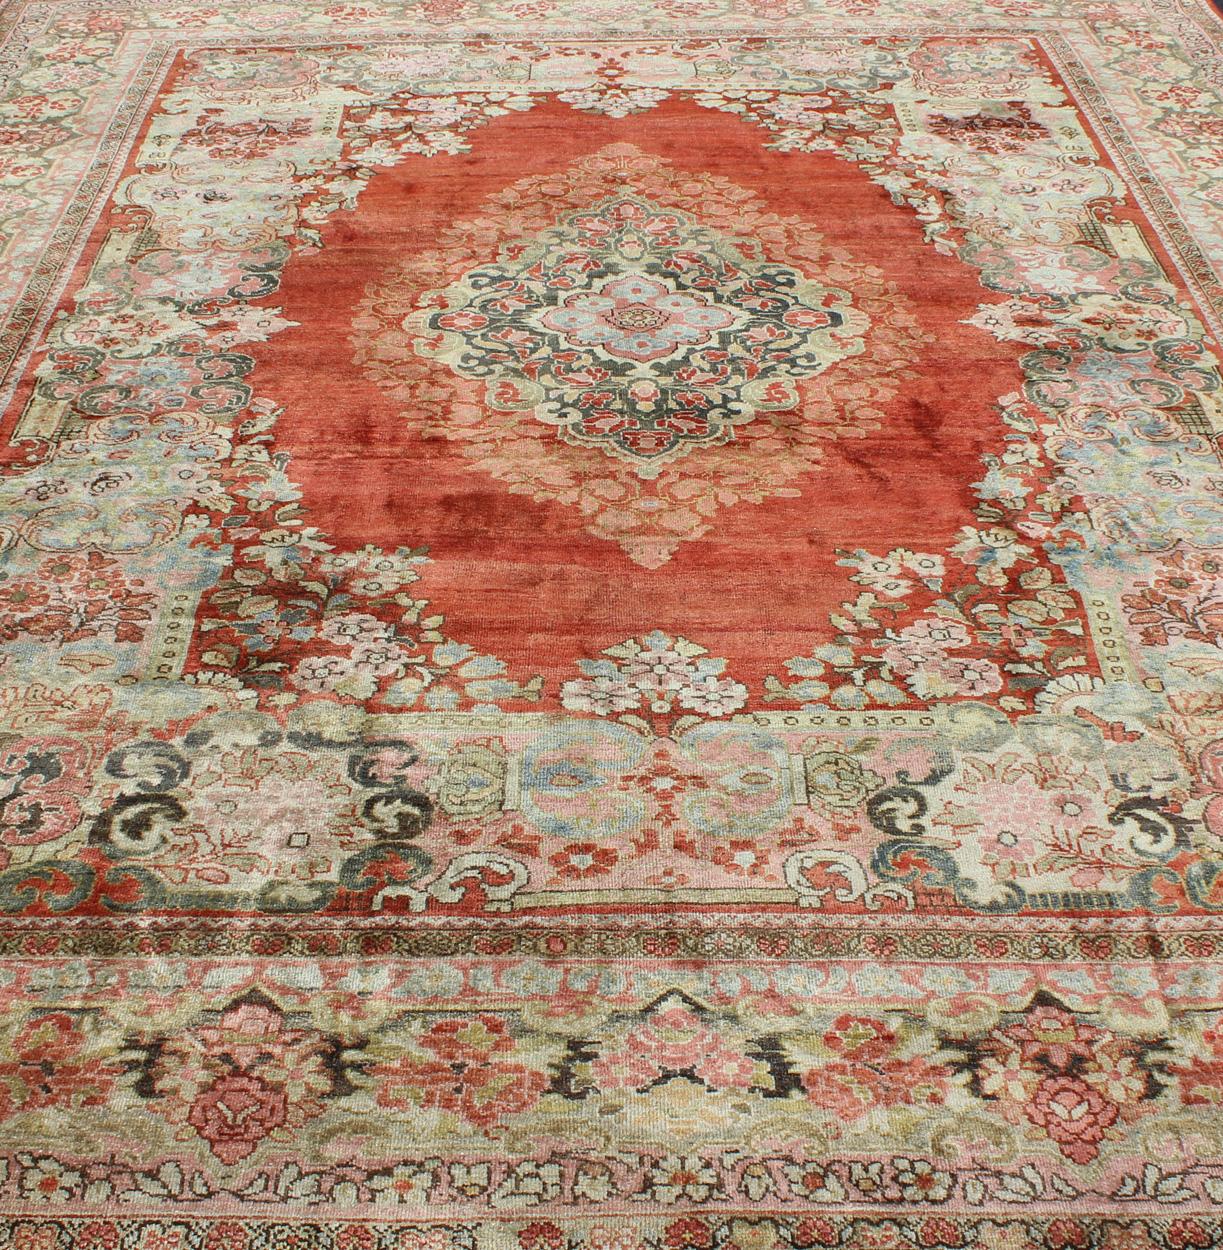  Persian Antique Mahal Rug with Beautiful Floral Design in Red, Pink, and Green  For Sale 3